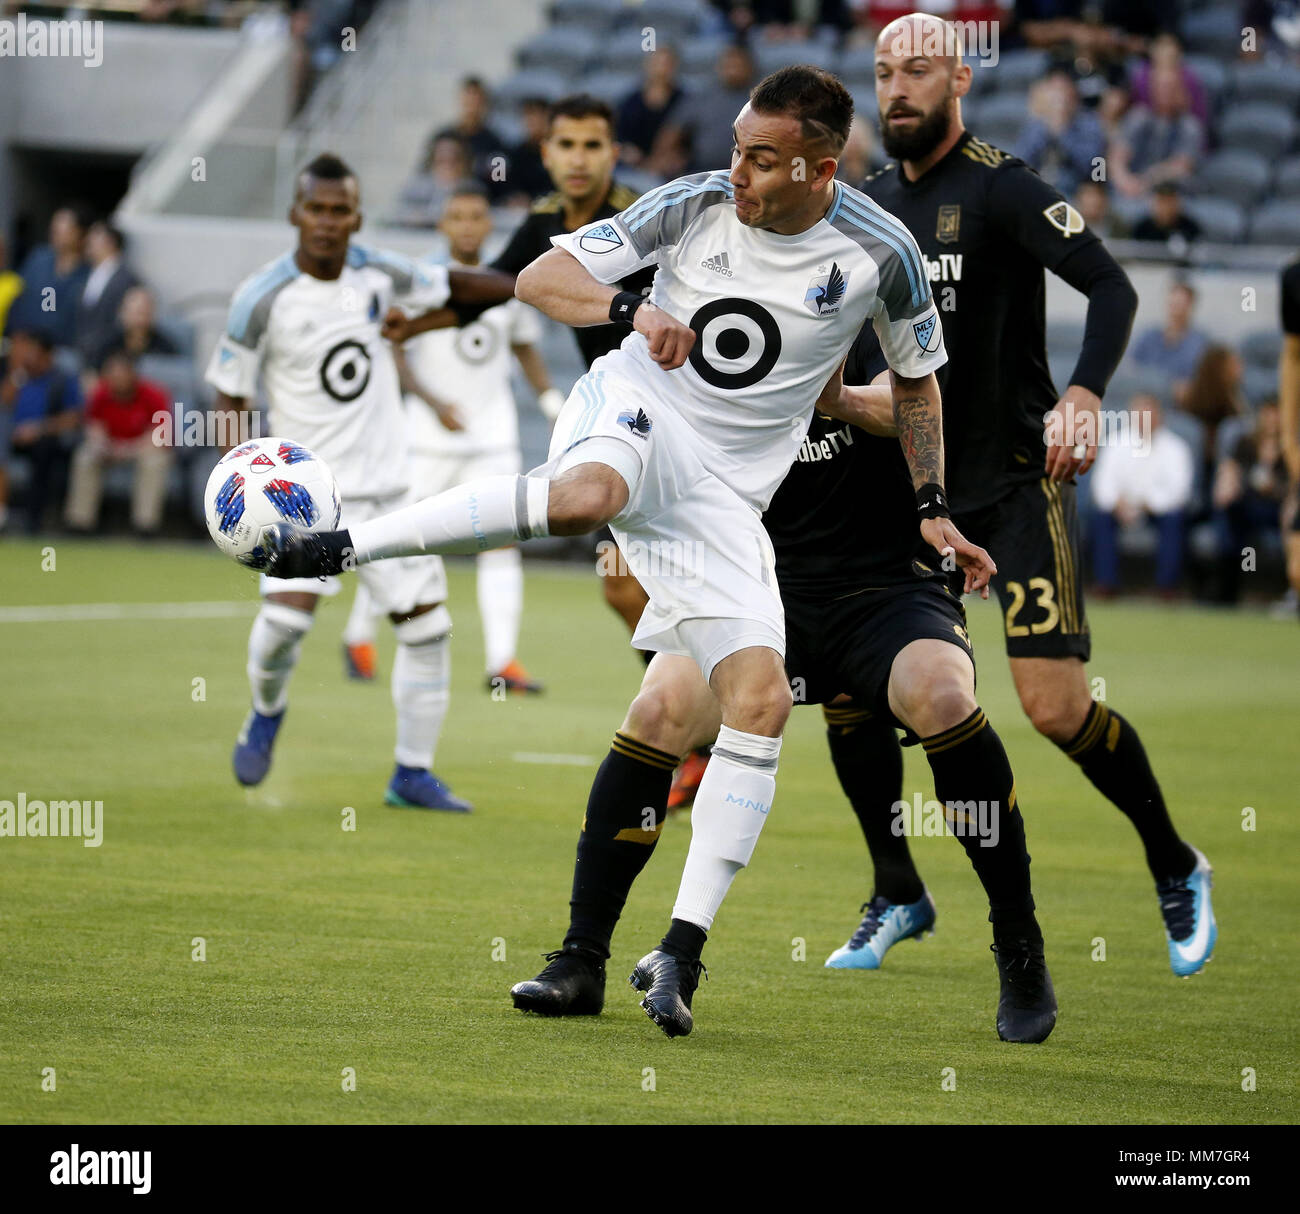 Los Angeles, California, USA. 9th May, 2018. Minnesota United midfielder Miguel Ibarra (10) controls the ball during an MLS soccer game between Los Angeles FC and Minnesota United at Banc of California Stadium in Los Angeles, Wednesday, May 9, 2018. The LAFC won 2-0. Credit: Ringo Chiu/ZUMA Wire/Alamy Live News Stock Photo